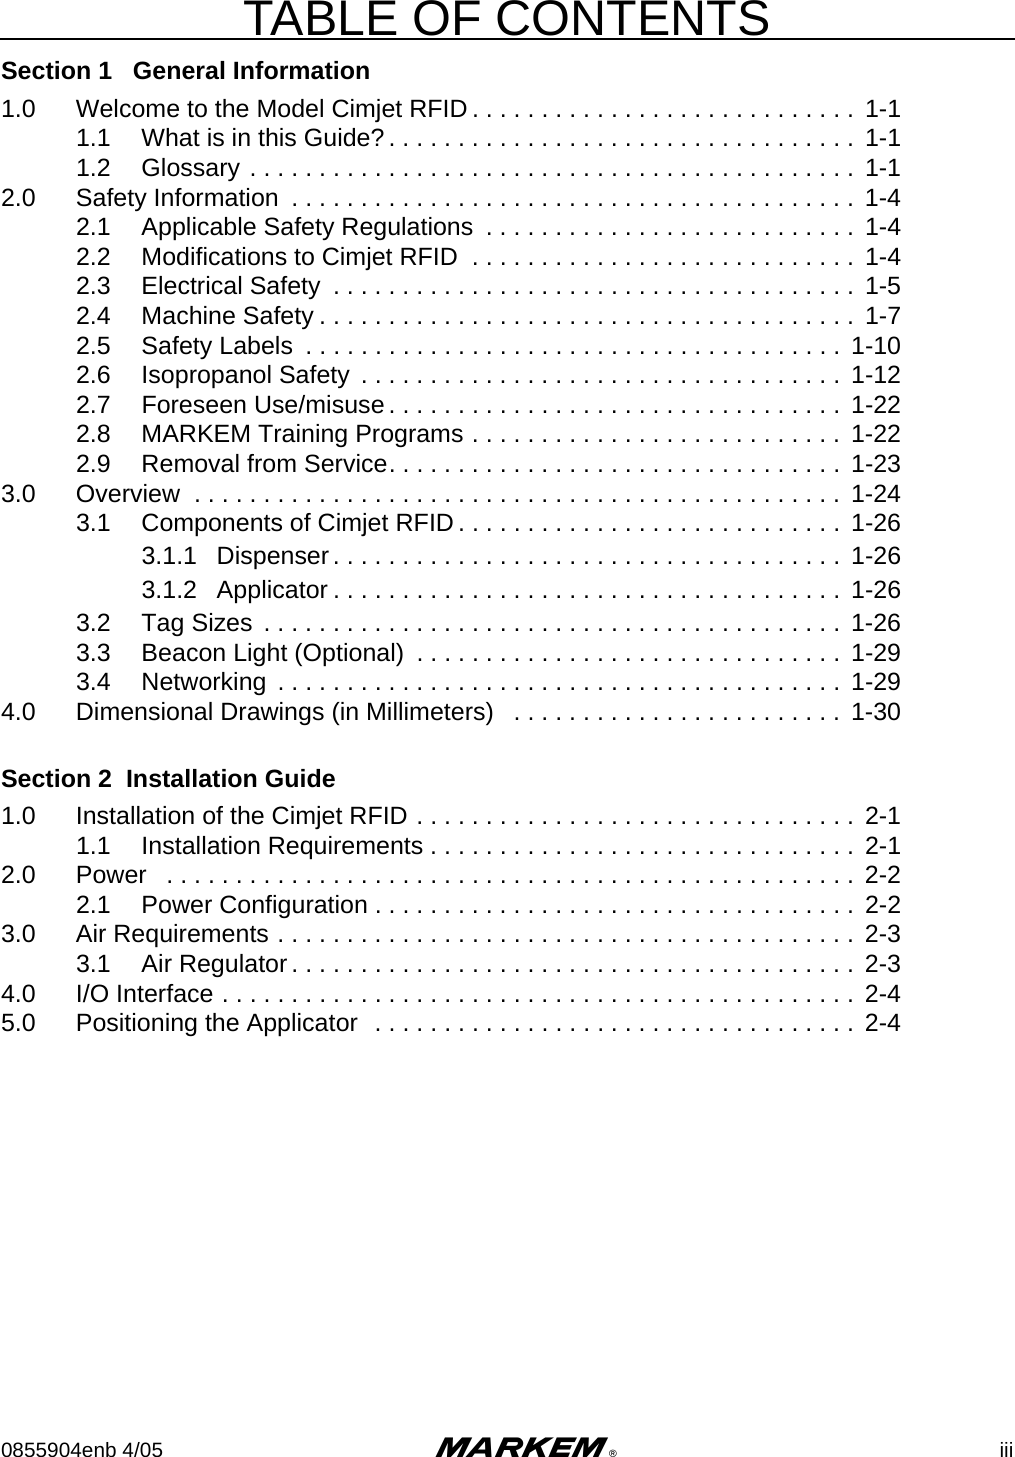 TABLE OF CONTENTS0855904enb 4/05 m® iiiSection 1   General Information1.0 Welcome to the Model Cimjet RFID . . . . . . . . . . . . . . . . . . . . . . . . . . . .  1-11.1 What is in this Guide? . . . . . . . . . . . . . . . . . . . . . . . . . . . . . . . . . .  1-11.2 Glossary . . . . . . . . . . . . . . . . . . . . . . . . . . . . . . . . . . . . . . . . . . . . 1-12.0 Safety Information  . . . . . . . . . . . . . . . . . . . . . . . . . . . . . . . . . . . . . . . . . 1-42.1 Applicable Safety Regulations  . . . . . . . . . . . . . . . . . . . . . . . . . . .  1-42.2 Modifications to Cimjet RFID  . . . . . . . . . . . . . . . . . . . . . . . . . . . .  1-42.3 Electrical Safety  . . . . . . . . . . . . . . . . . . . . . . . . . . . . . . . . . . . . . .  1-52.4 Machine Safety . . . . . . . . . . . . . . . . . . . . . . . . . . . . . . . . . . . . . . . 1-72.5 Safety Labels  . . . . . . . . . . . . . . . . . . . . . . . . . . . . . . . . . . . . . . . 1-102.6 Isopropanol Safety  . . . . . . . . . . . . . . . . . . . . . . . . . . . . . . . . . . .  1-122.7 Foreseen Use/misuse. . . . . . . . . . . . . . . . . . . . . . . . . . . . . . . . .  1-222.8 MARKEM Training Programs . . . . . . . . . . . . . . . . . . . . . . . . . . . 1-222.9 Removal from Service. . . . . . . . . . . . . . . . . . . . . . . . . . . . . . . . .  1-233.0 Overview  . . . . . . . . . . . . . . . . . . . . . . . . . . . . . . . . . . . . . . . . . . . . . . . 1-243.1 Components of Cimjet RFID . . . . . . . . . . . . . . . . . . . . . . . . . . . .  1-263.1.1 Dispenser. . . . . . . . . . . . . . . . . . . . . . . . . . . . . . . . . . . . .  1-263.1.2 Applicator . . . . . . . . . . . . . . . . . . . . . . . . . . . . . . . . . . . . . 1-263.2 Tag Sizes  . . . . . . . . . . . . . . . . . . . . . . . . . . . . . . . . . . . . . . . . . .  1-263.3 Beacon Light (Optional)  . . . . . . . . . . . . . . . . . . . . . . . . . . . . . . .  1-293.4 Networking  . . . . . . . . . . . . . . . . . . . . . . . . . . . . . . . . . . . . . . . . .  1-294.0 Dimensional Drawings (in Millimeters)   . . . . . . . . . . . . . . . . . . . . . . . .  1-30Section 2  Installation Guide1.0 Installation of the Cimjet RFID . . . . . . . . . . . . . . . . . . . . . . . . . . . . . . . . 2-11.1 Installation Requirements . . . . . . . . . . . . . . . . . . . . . . . . . . . . . . .  2-12.0 Power   . . . . . . . . . . . . . . . . . . . . . . . . . . . . . . . . . . . . . . . . . . . . . . . . . . 2-22.1 Power Configuration . . . . . . . . . . . . . . . . . . . . . . . . . . . . . . . . . . . 2-23.0 Air Requirements . . . . . . . . . . . . . . . . . . . . . . . . . . . . . . . . . . . . . . . . . . 2-33.1 Air Regulator . . . . . . . . . . . . . . . . . . . . . . . . . . . . . . . . . . . . . . . . .  2-34.0 I/O Interface . . . . . . . . . . . . . . . . . . . . . . . . . . . . . . . . . . . . . . . . . . . . . .  2-45.0 Positioning the Applicator  . . . . . . . . . . . . . . . . . . . . . . . . . . . . . . . . . . .  2-4